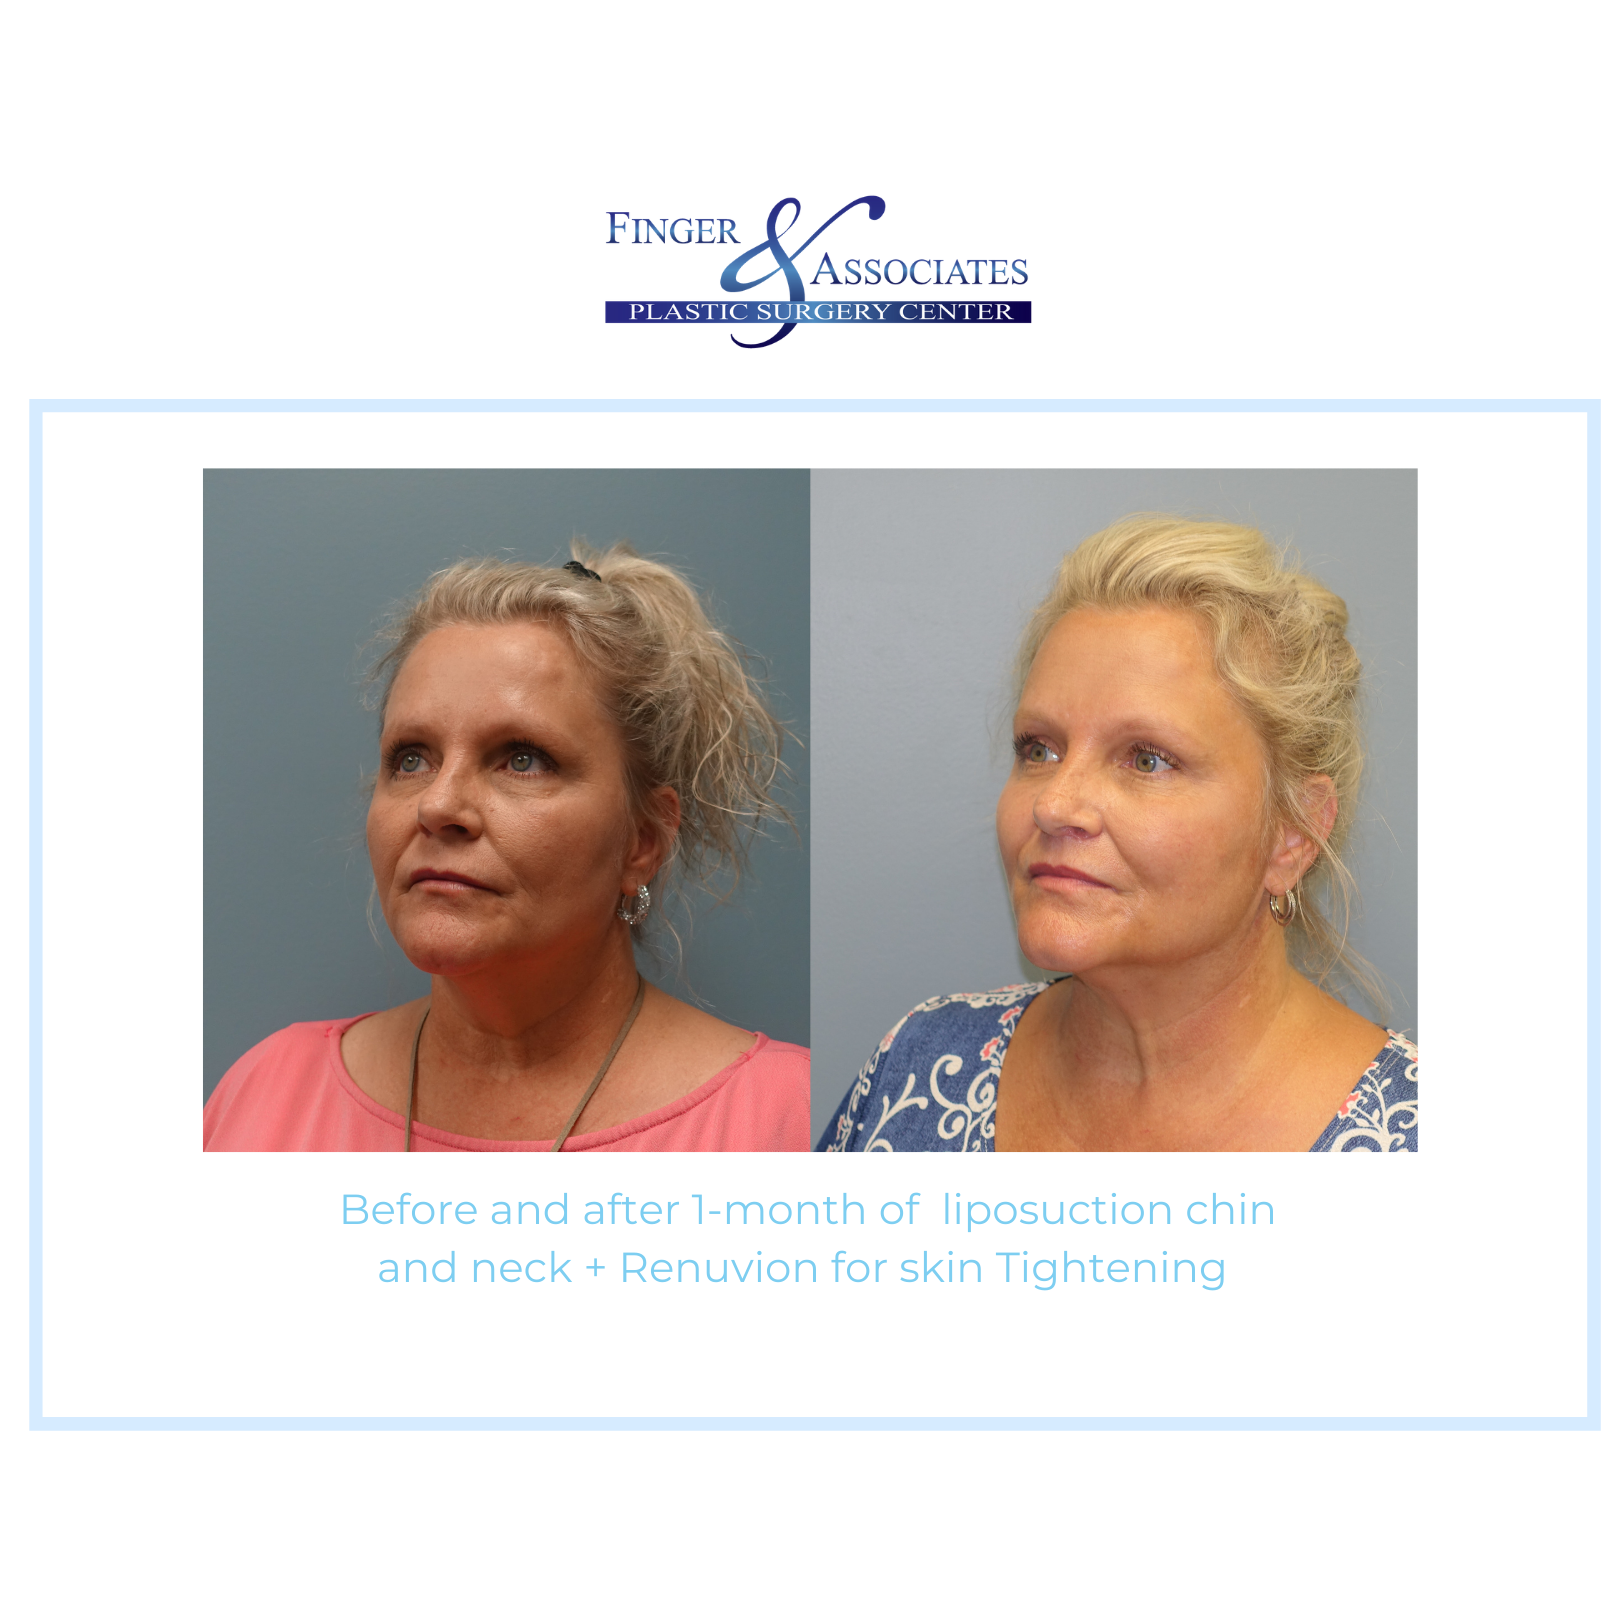 Before and after Renuvion + Lipo by Dr. Finger in Savannah